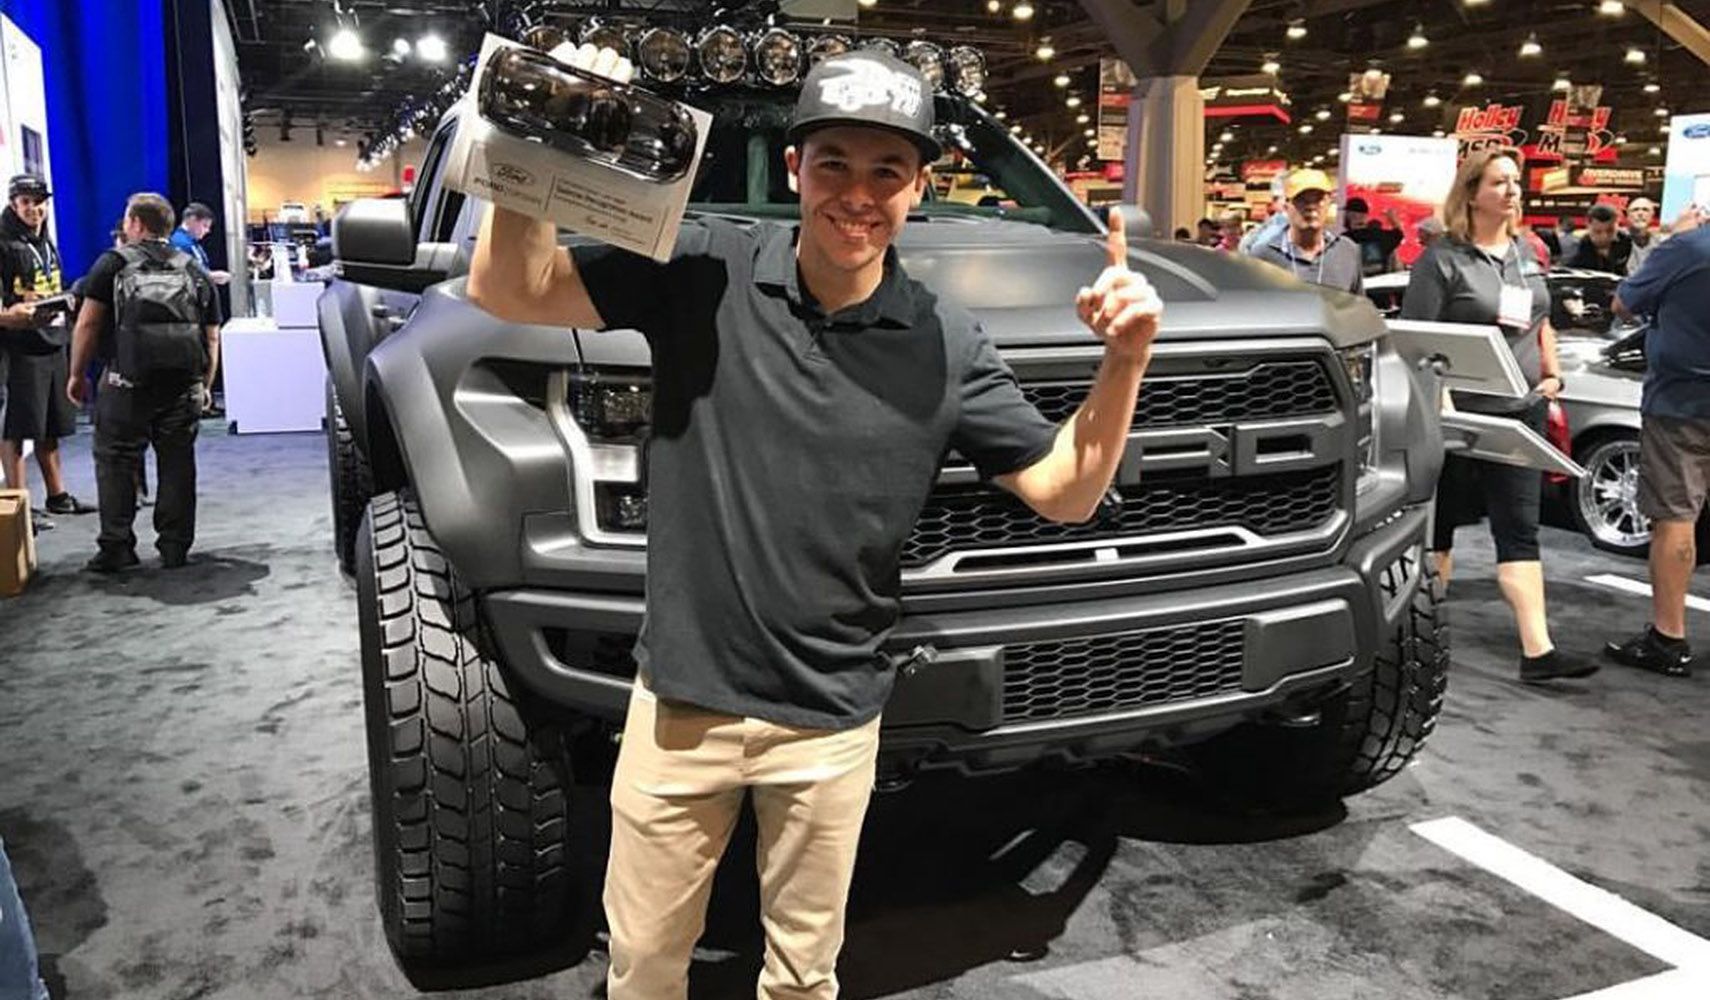 Brad Won The 2016 SEMA “Young Gun” Award, The 2016 Ford Motor Company “Design” Award, And Was A Winner In The 2016 SEMA “Top 10” Battle Of The Builders